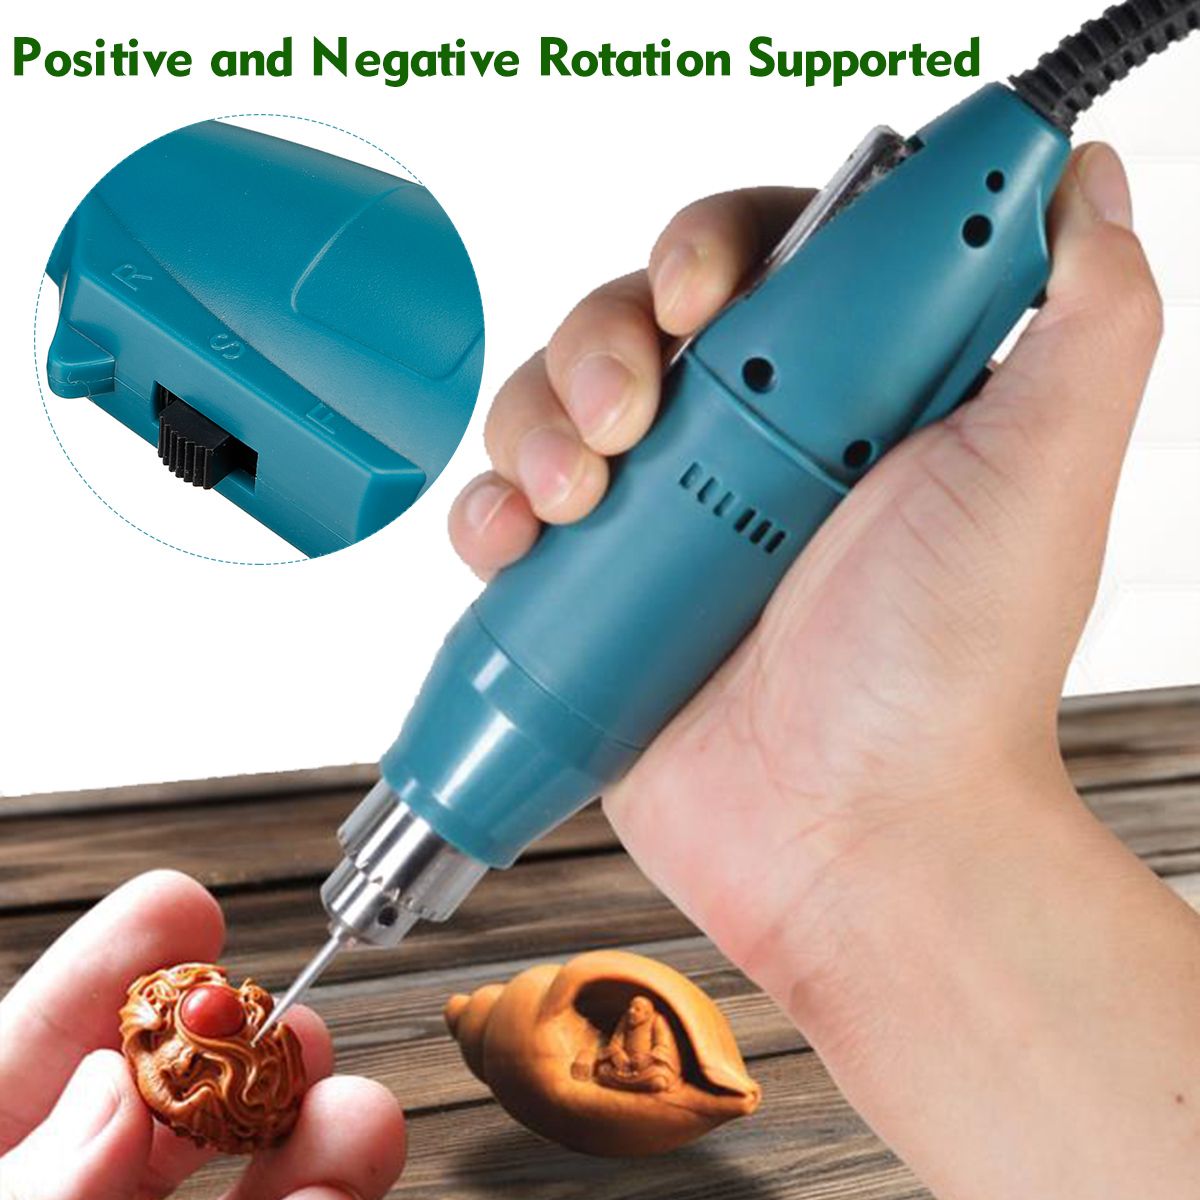 105Pcs-20000RPM-Electric-Grinder-Drill-Variable-Speed-Rotary-Power-Tools-Kit-1755850